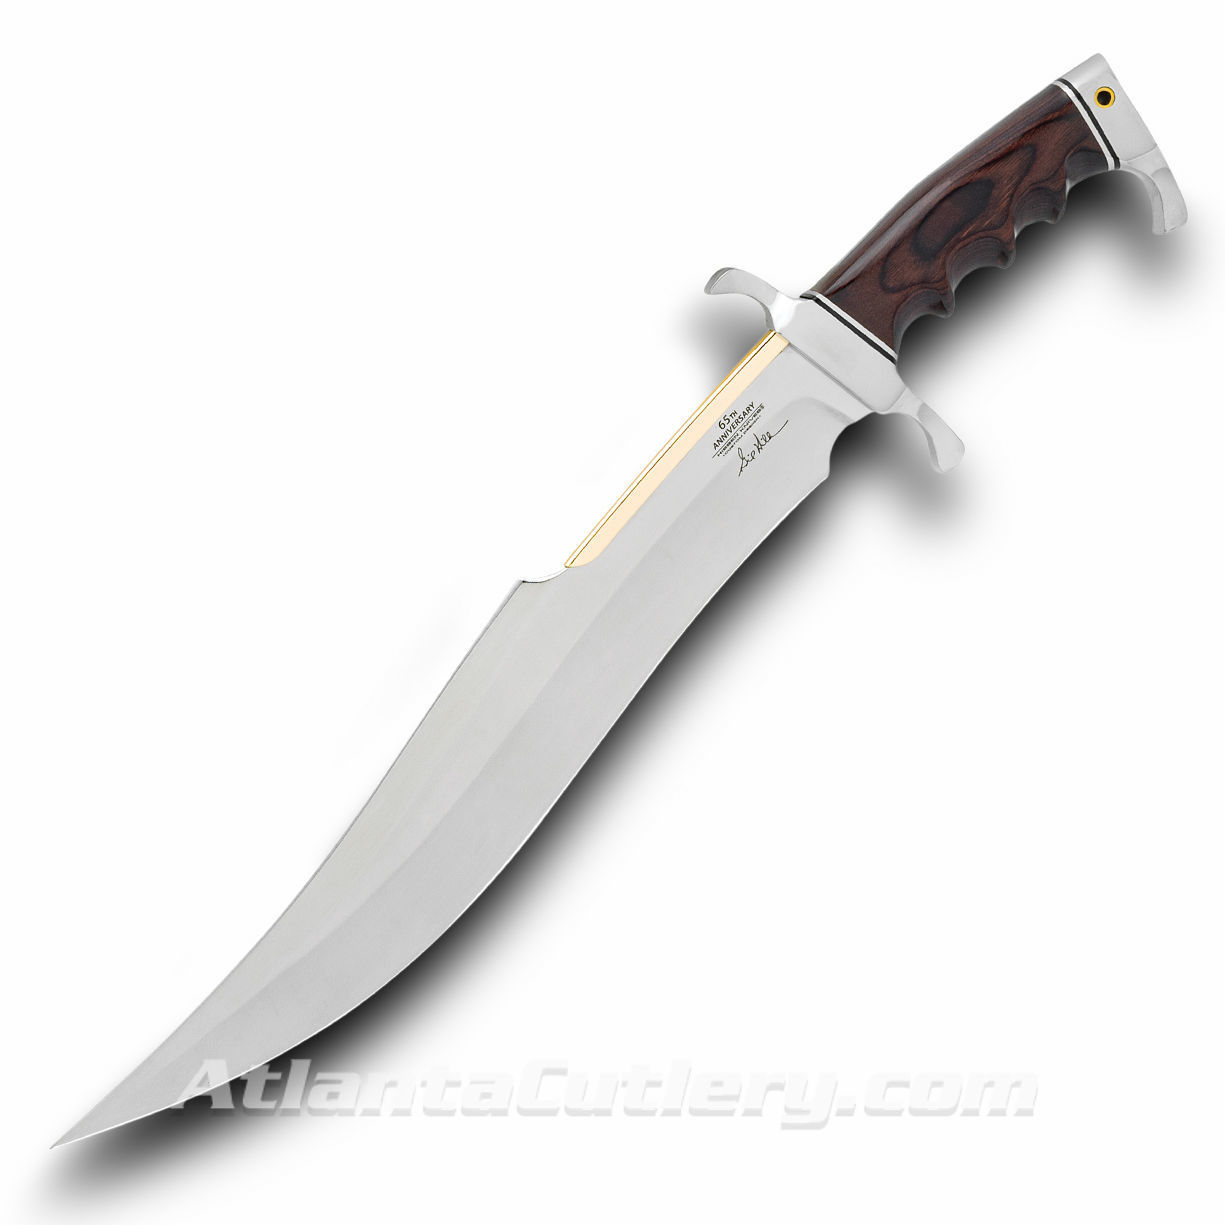 Gil Hibben 65th Anniversary Spartan Bowie has stainless steel upswept blade, Pakkawood handle, includes wooden display stand